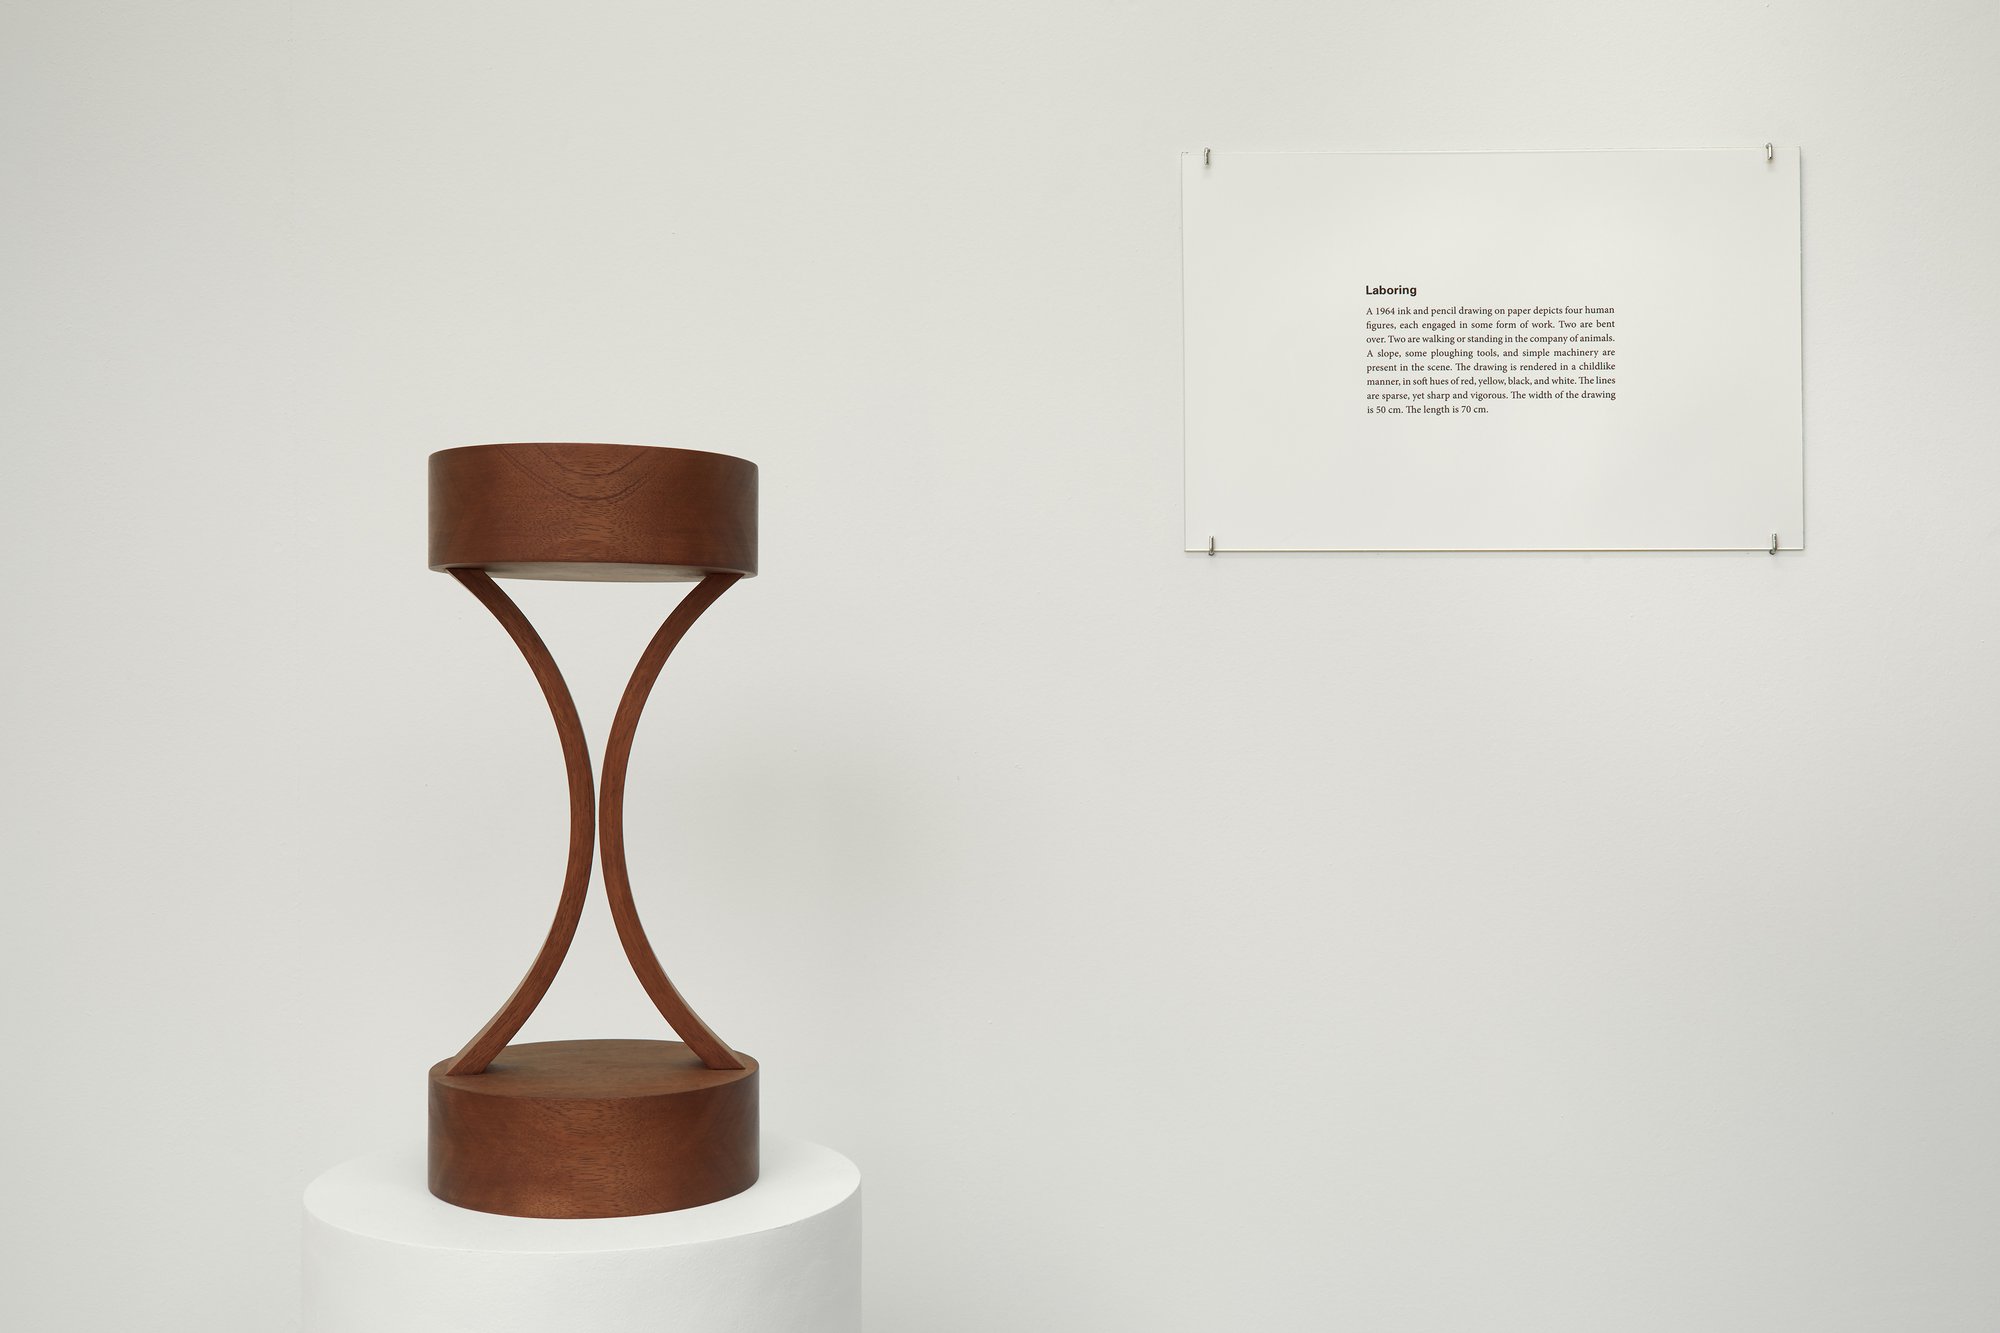 Iman Issa, Labouring (study for 2012), mahogany sculpture, text panel under glass, white plinth, sculpture: 39.4 x 18 cm (15 1/2 x 7 1/8 in), plinth: 95.2 x 30 cm (37 1/2 x 11 3/4 in), 2012